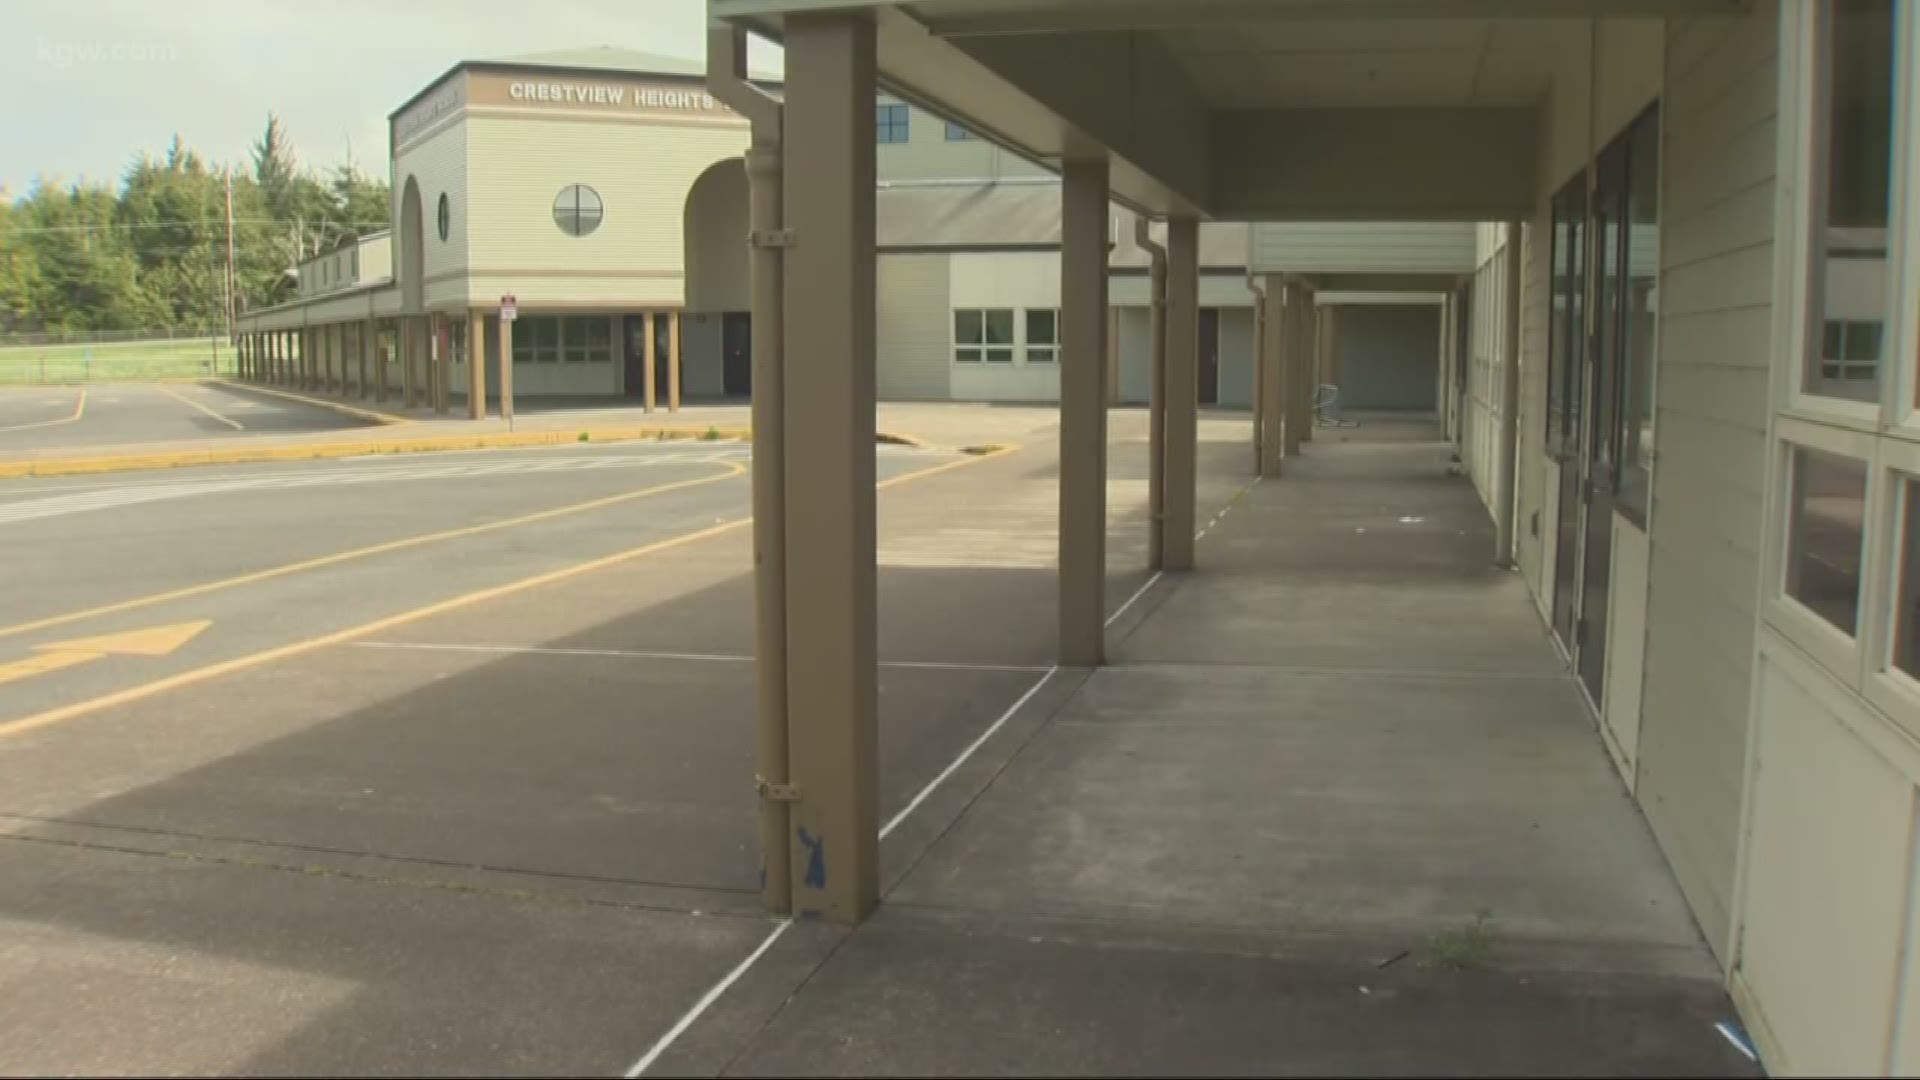 Concerns of carbon monoxide exposure closed Crestview Heights Elementary School on the Oregon Coast.